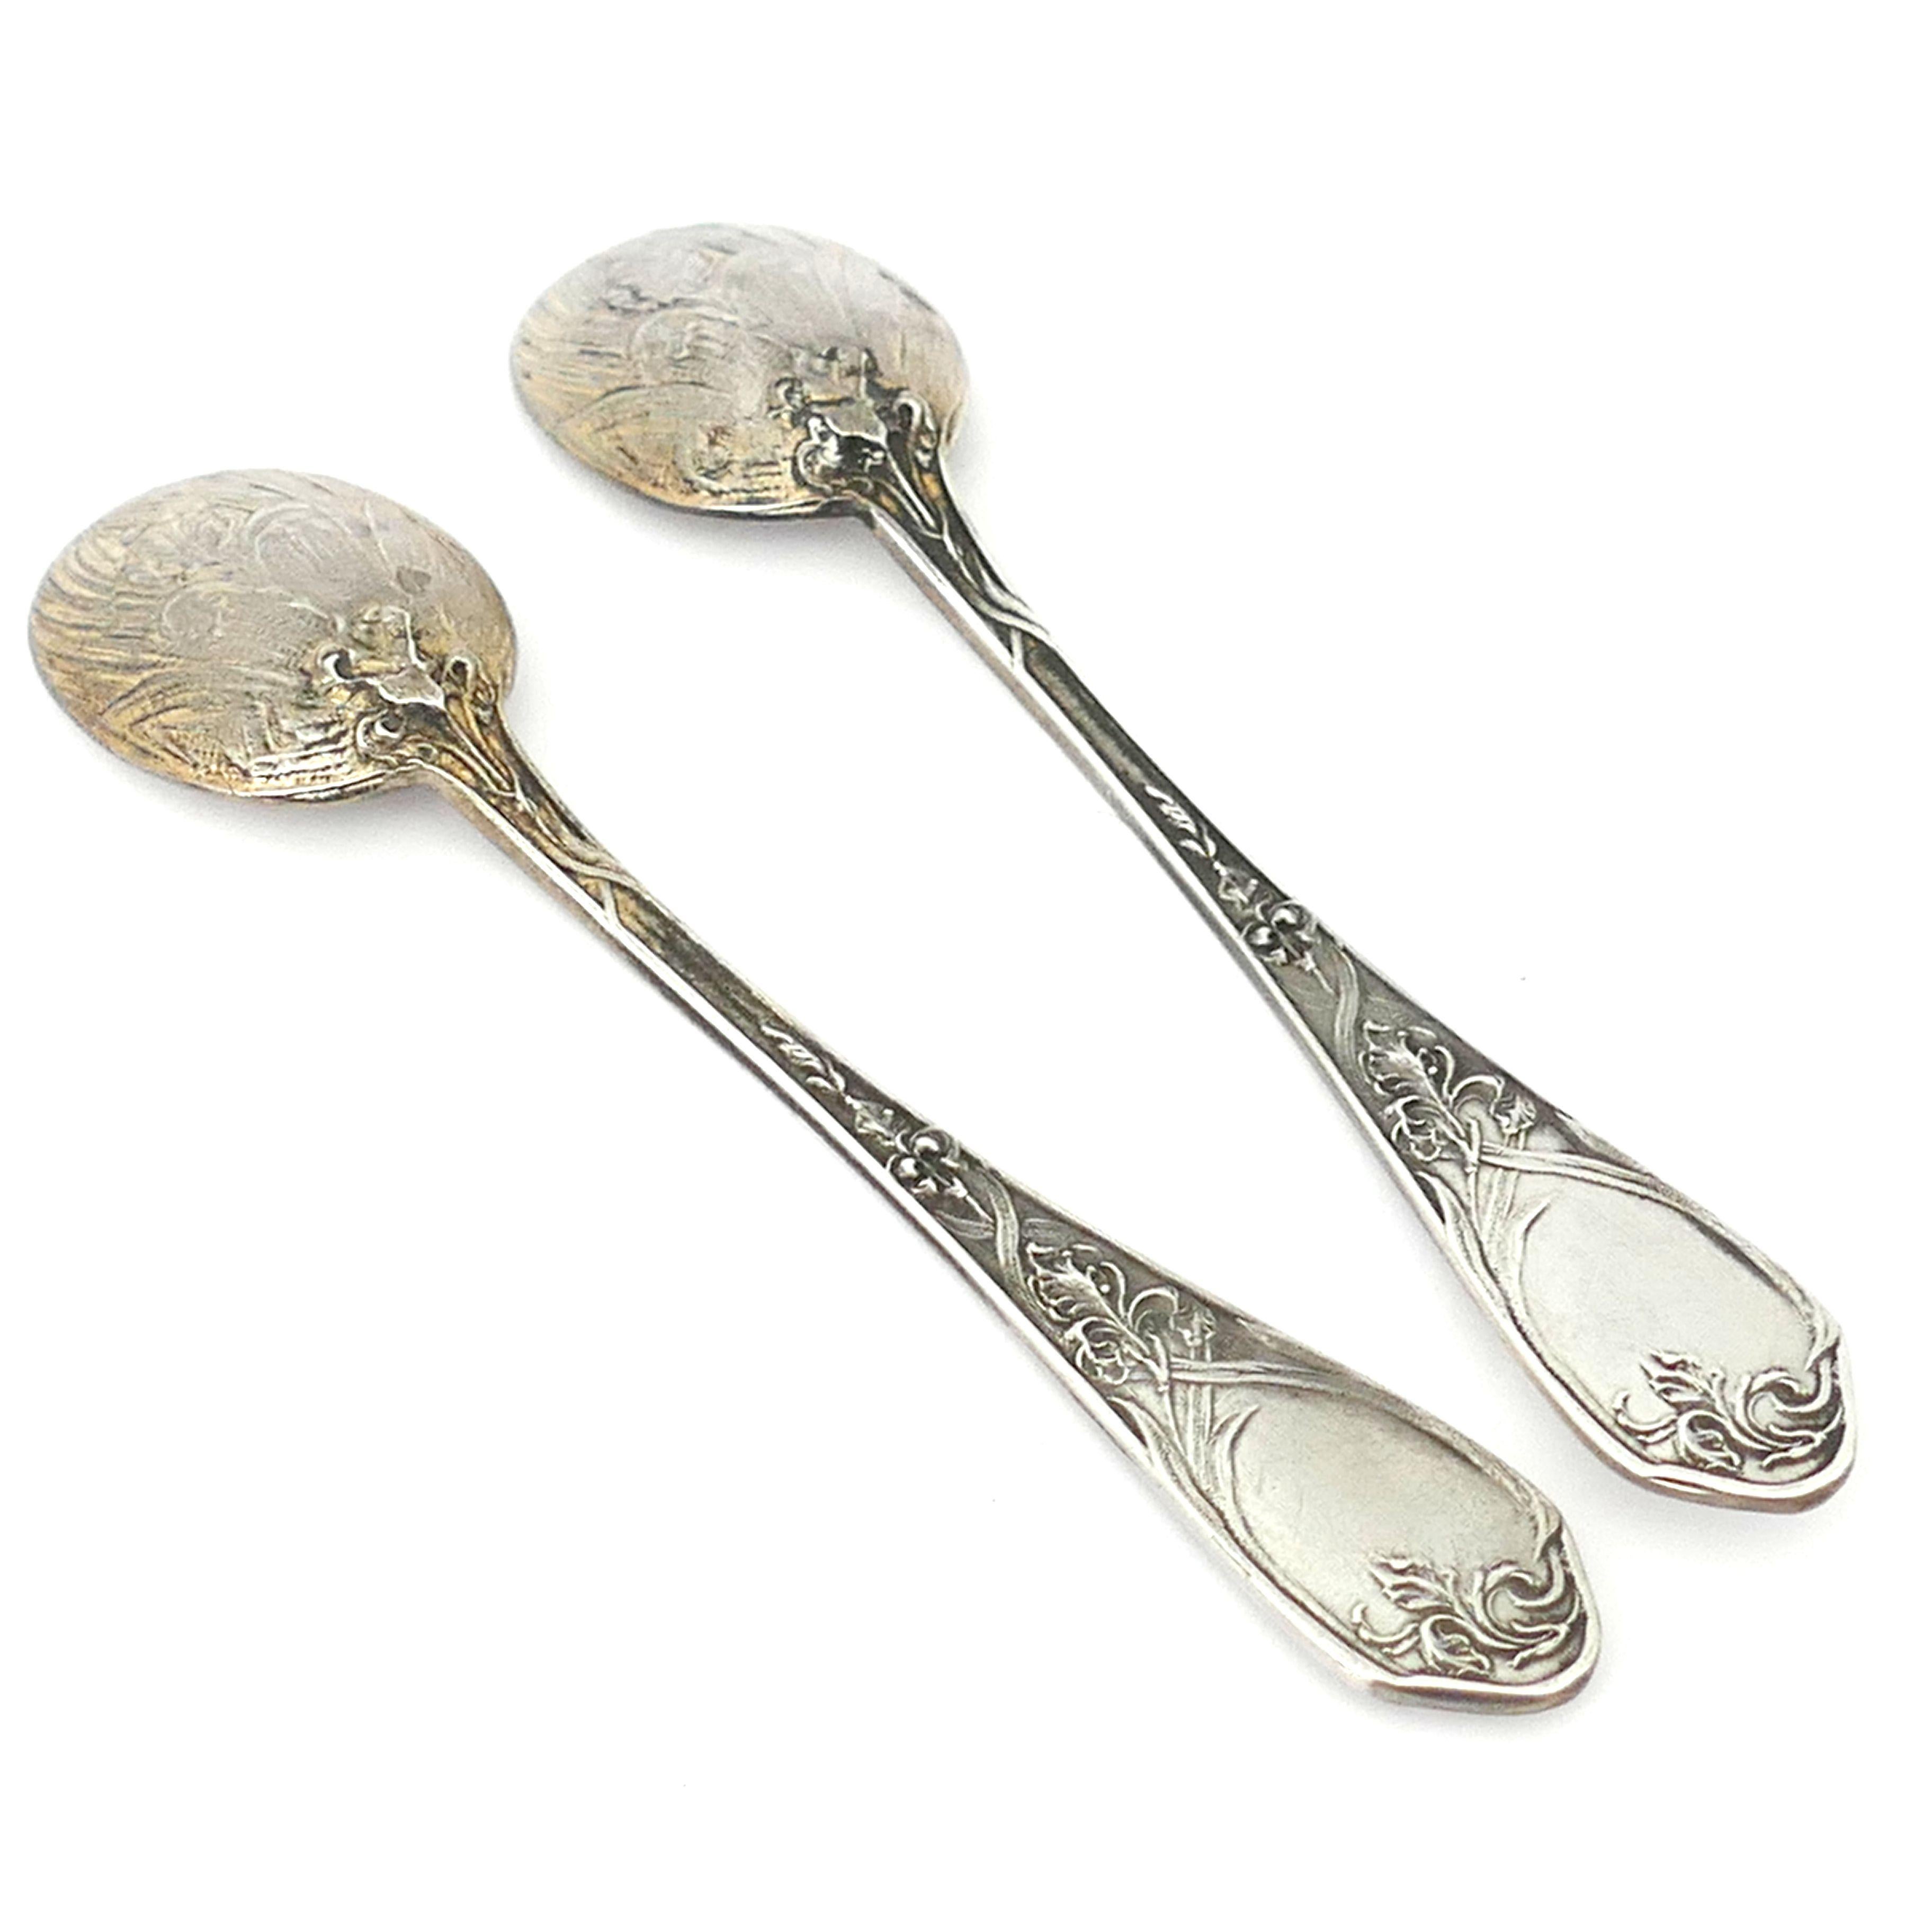 Gold Puiforcat Rare French Sterling Silver Salt Cellars Pair with Spoons, Iris